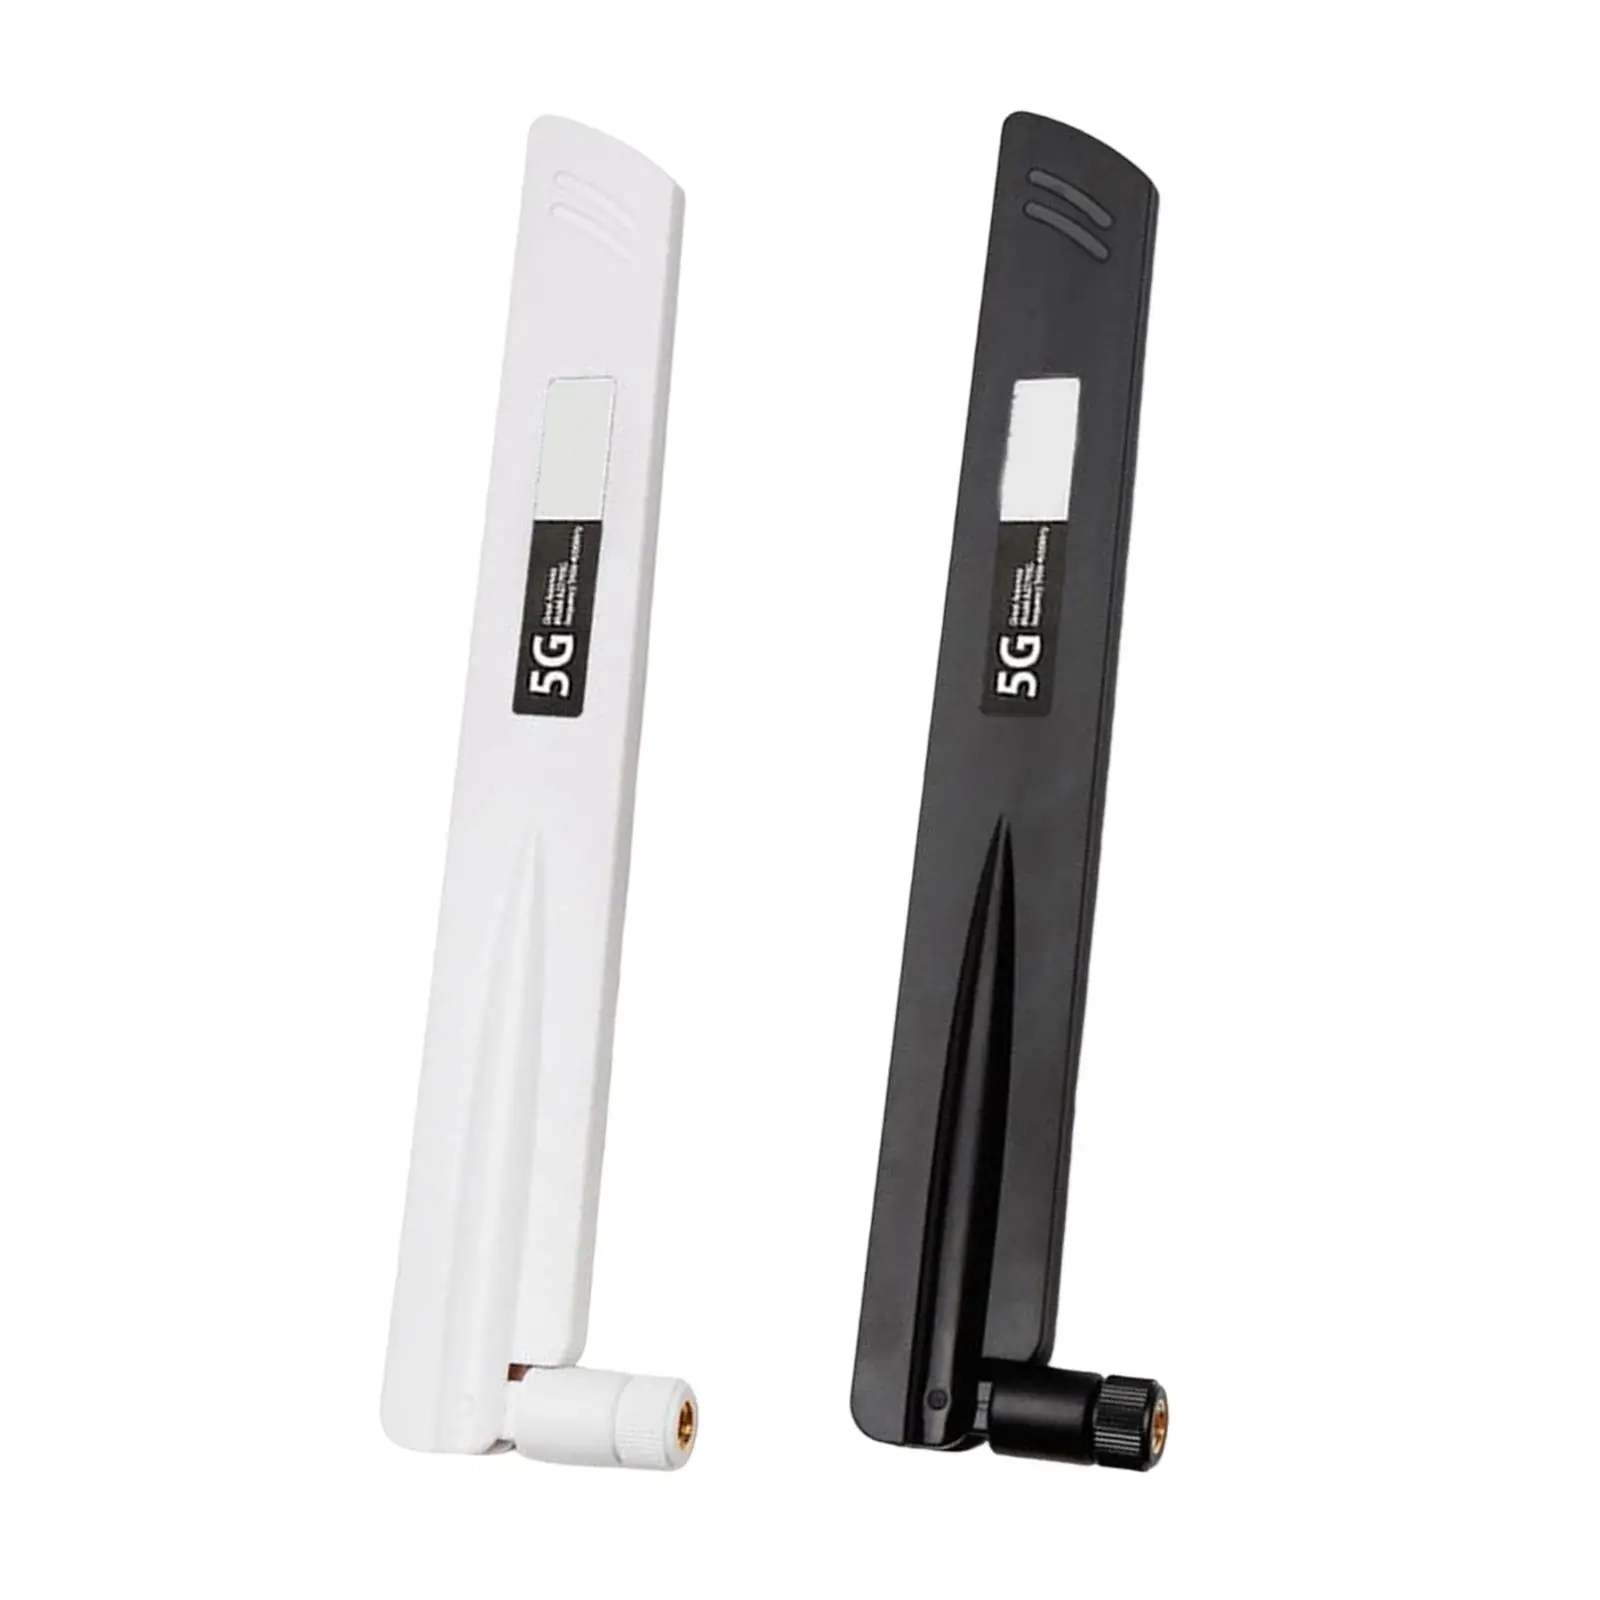 3G 4G 5G LTE Antenna 18dBi Universal 600MHz-6000MHz Foldable for Router Wireless Network